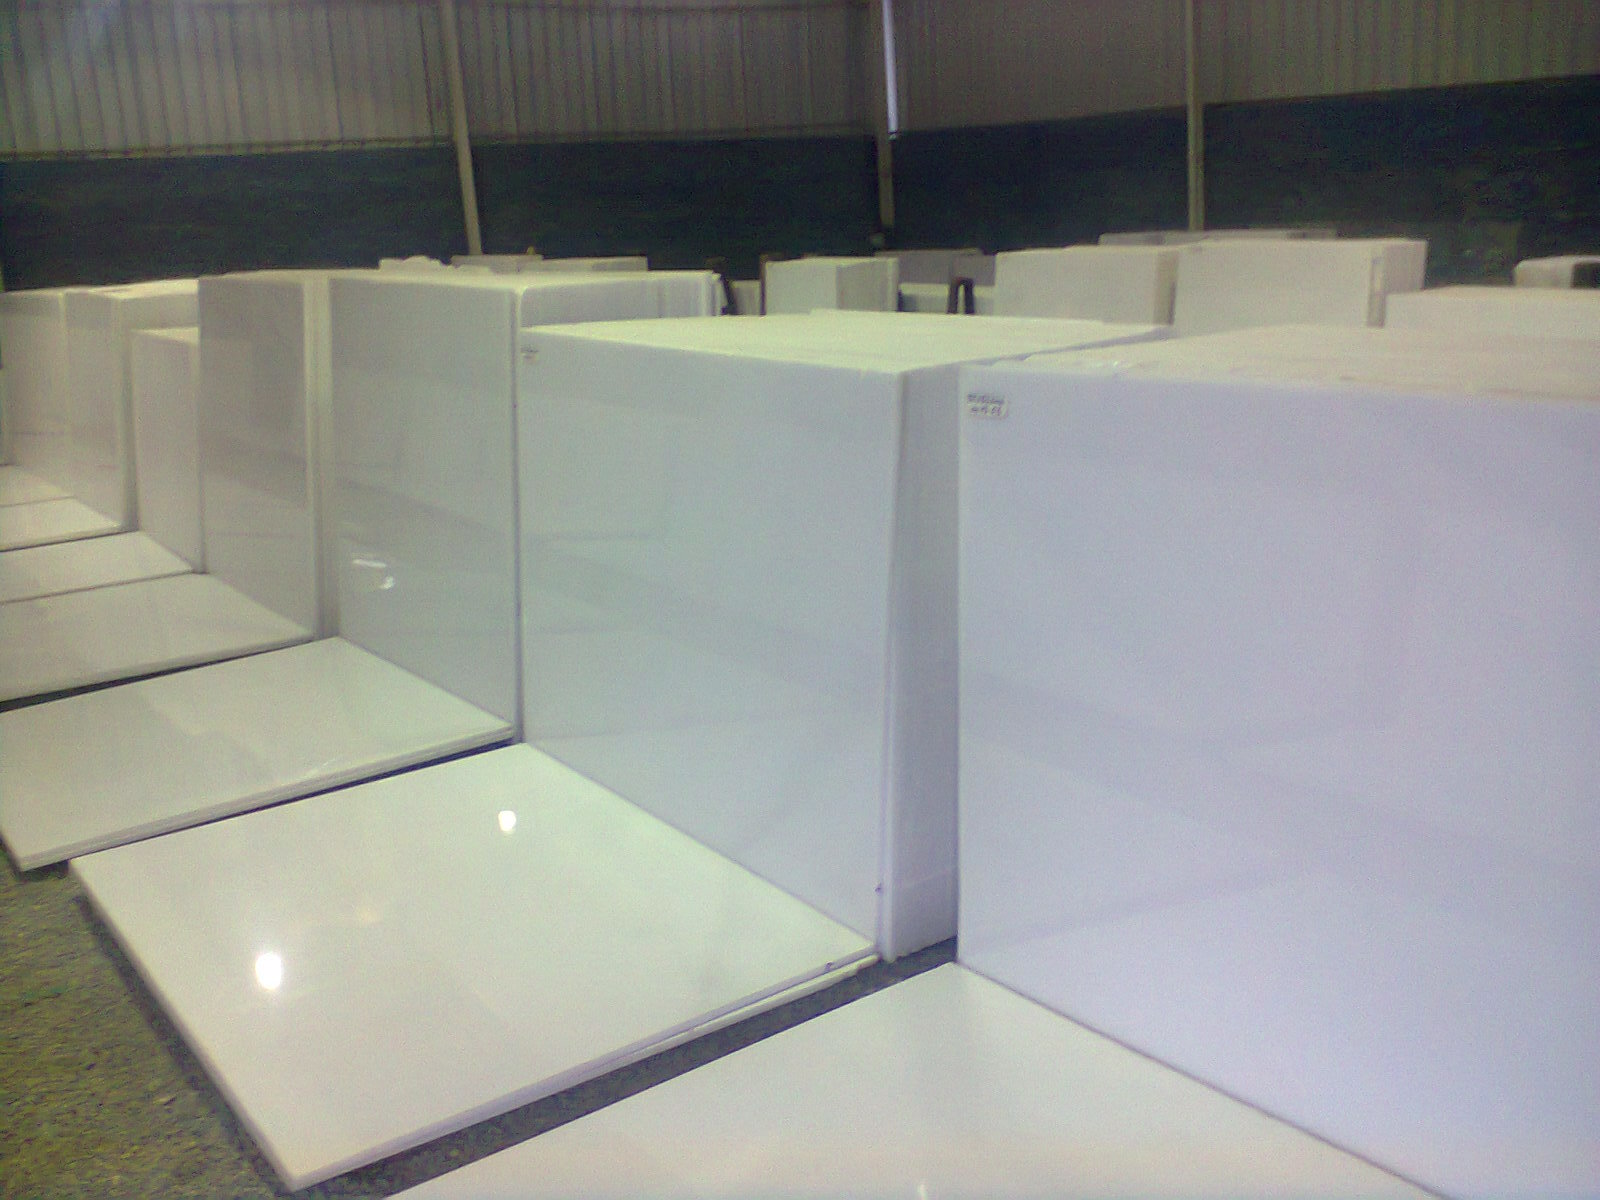 Pure white marble slabs Manufacturer Supplier Wholesale Exporter Importer Buyer Trader Retailer in rajsamand Rajasthan India